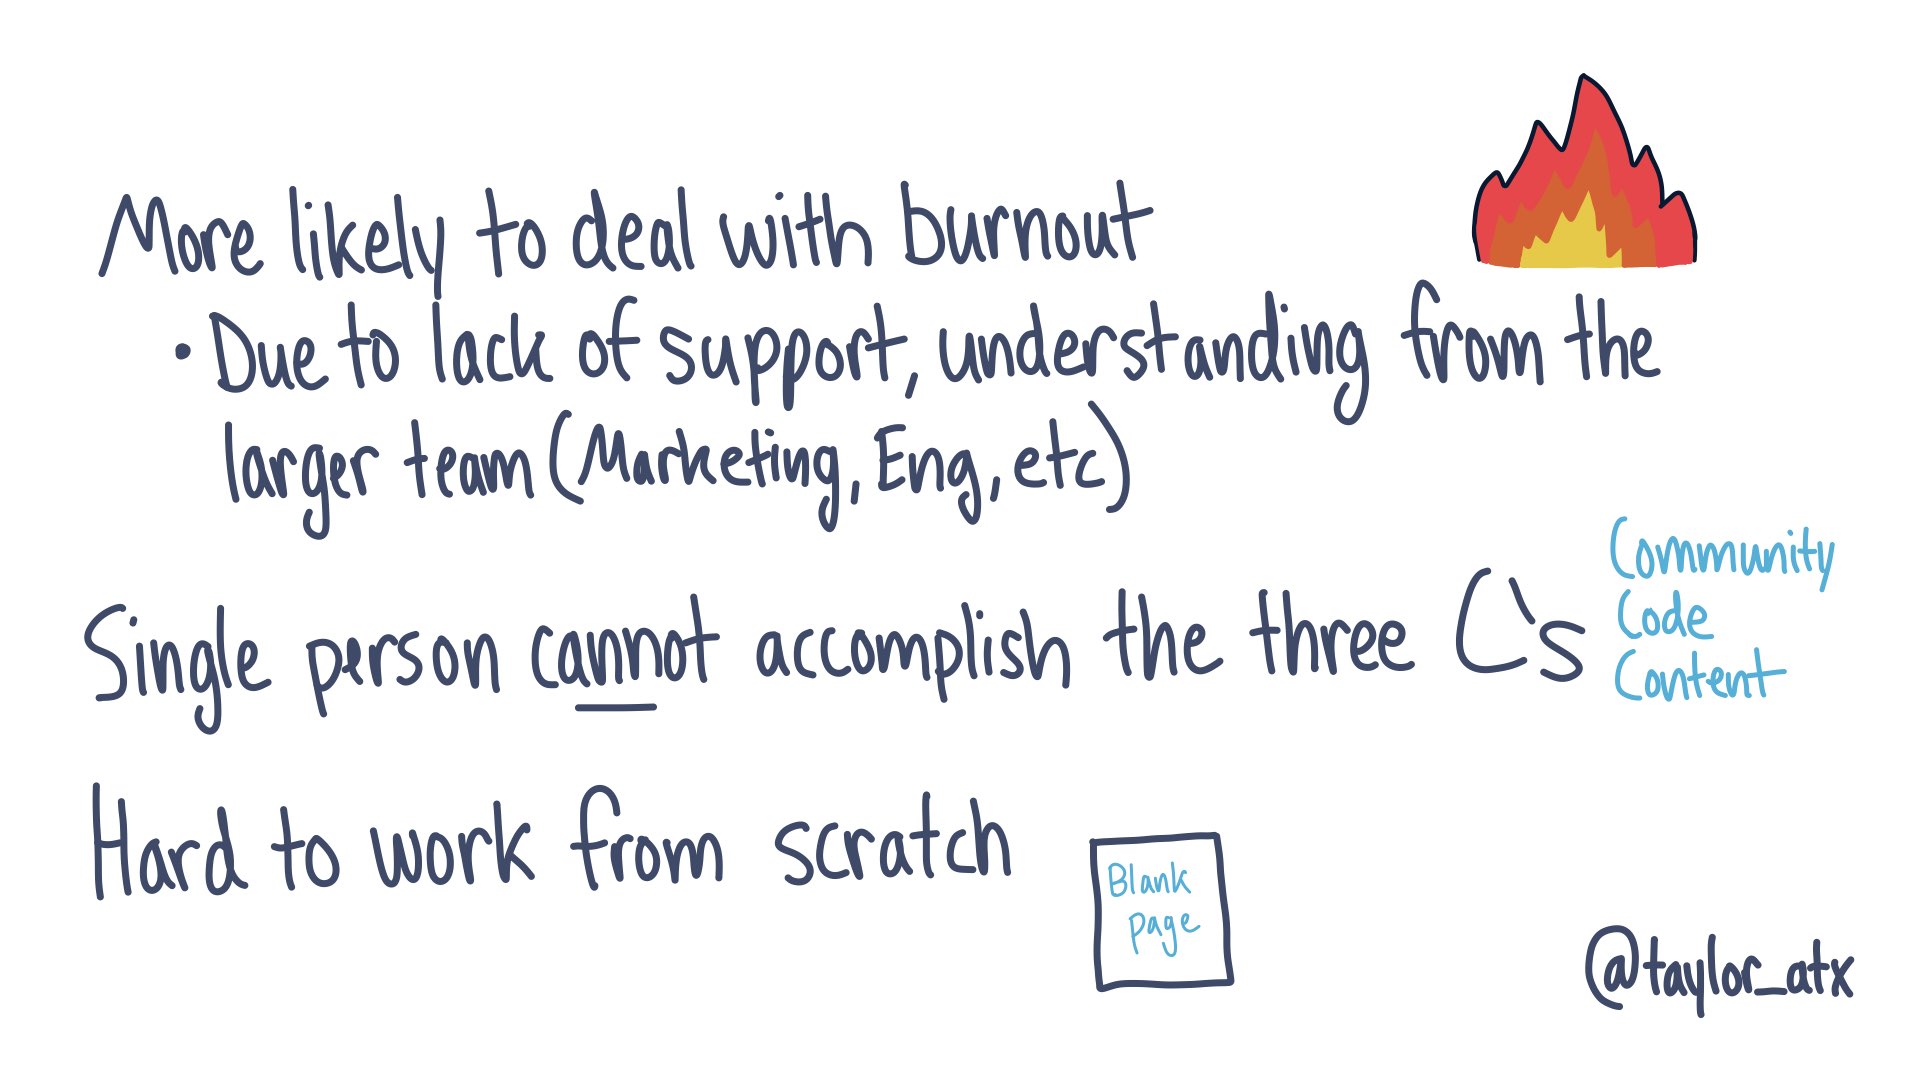 More likely to deal with burnout (due to a lack of support, understanding from the larger team (Marketing, Eng, etc.), single person cannot accomplish the three C's (community, code, content), hard to work from scratch